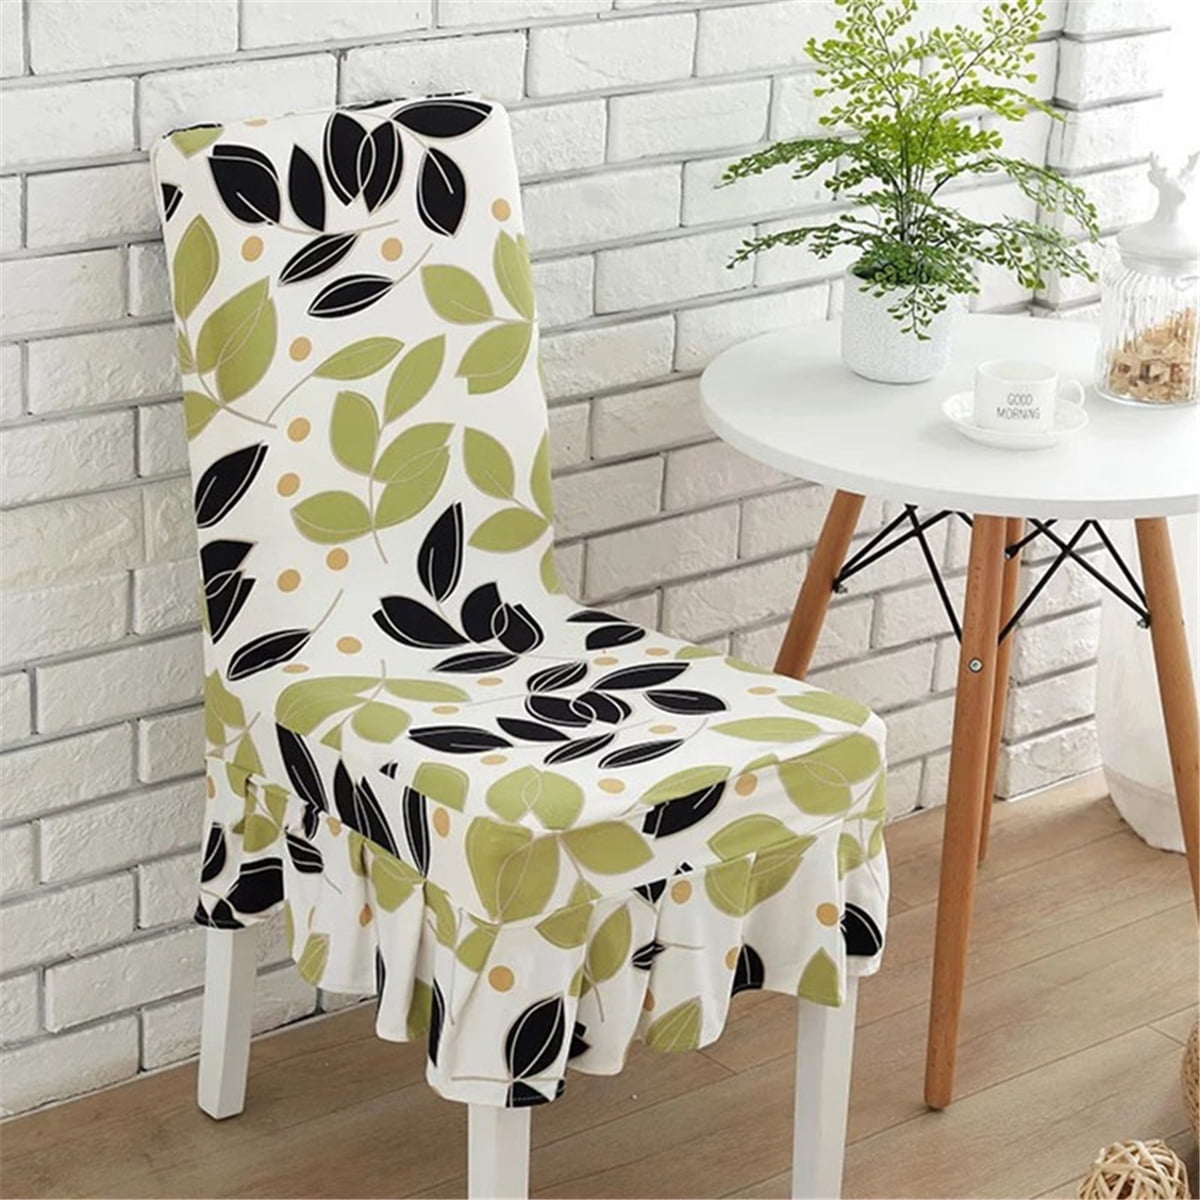 Chair covers for folding chairs